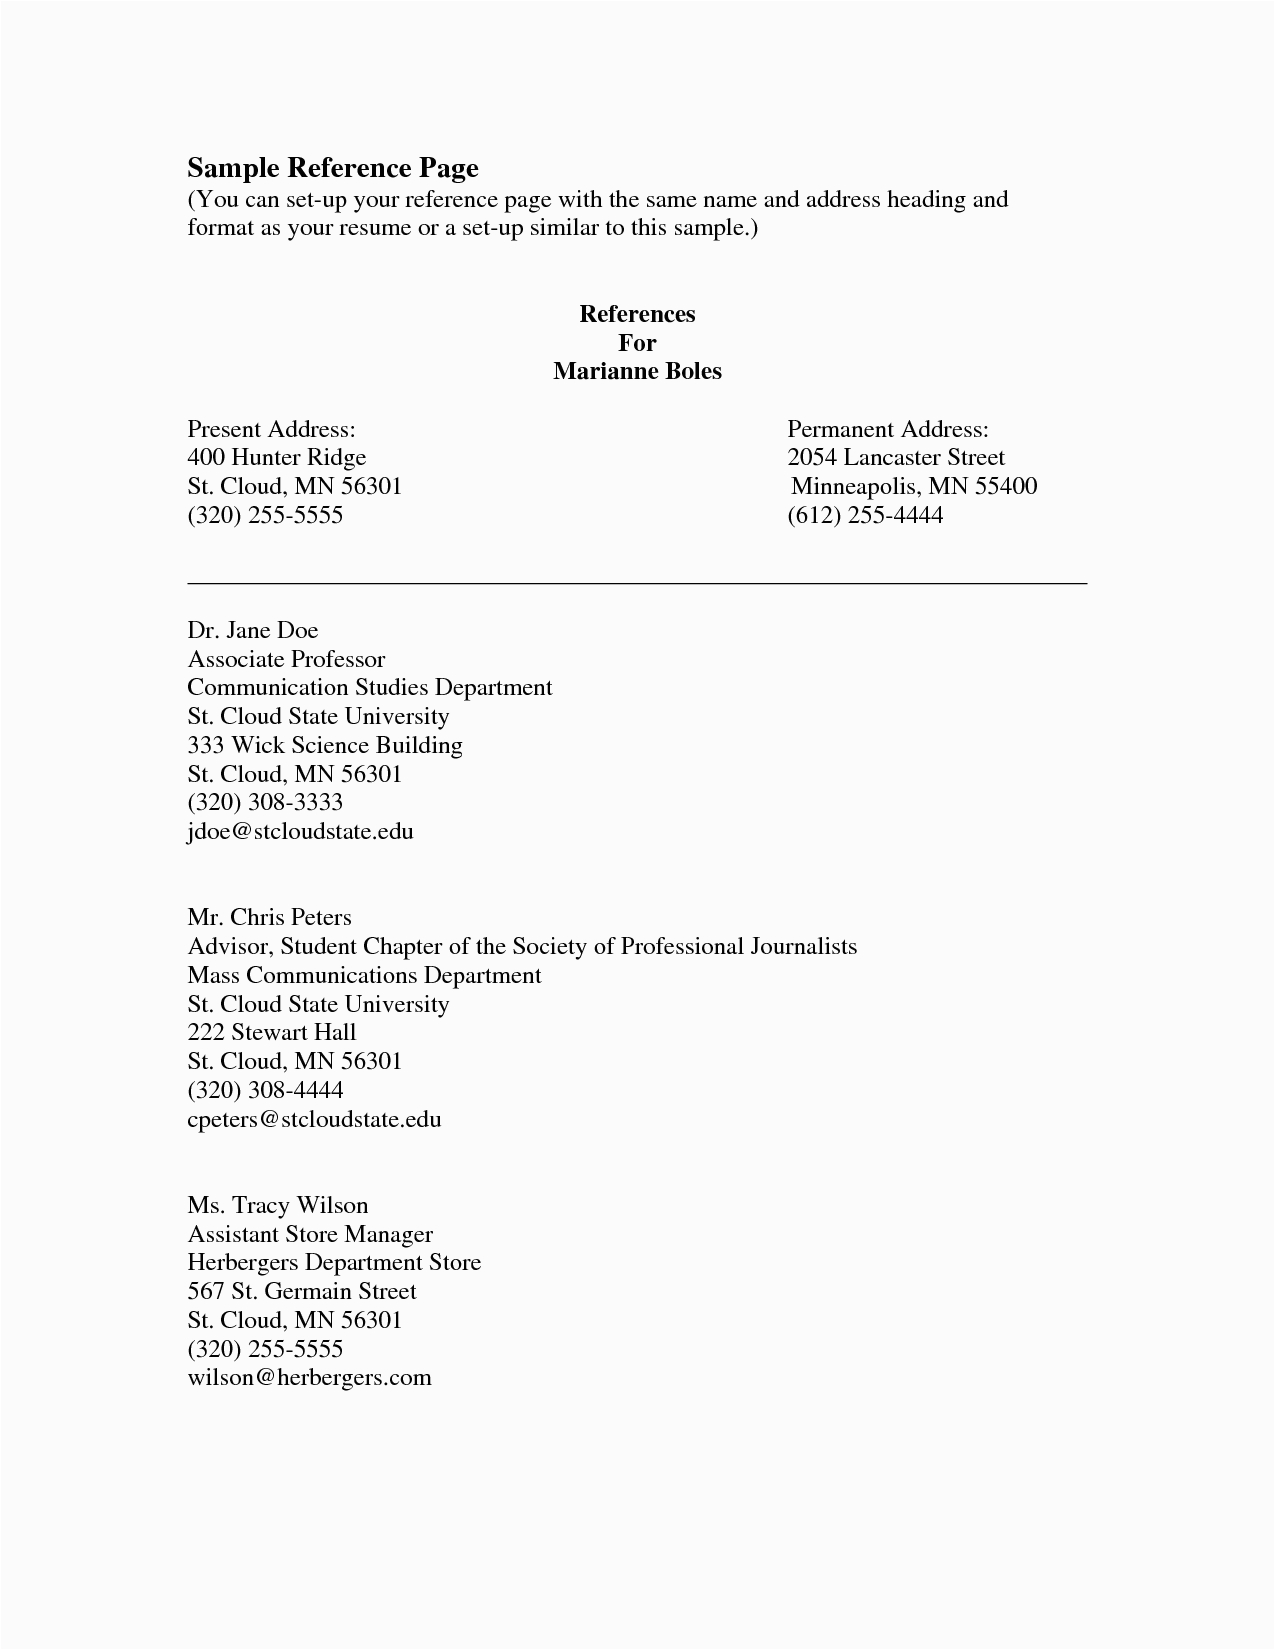 resume reference page 3191